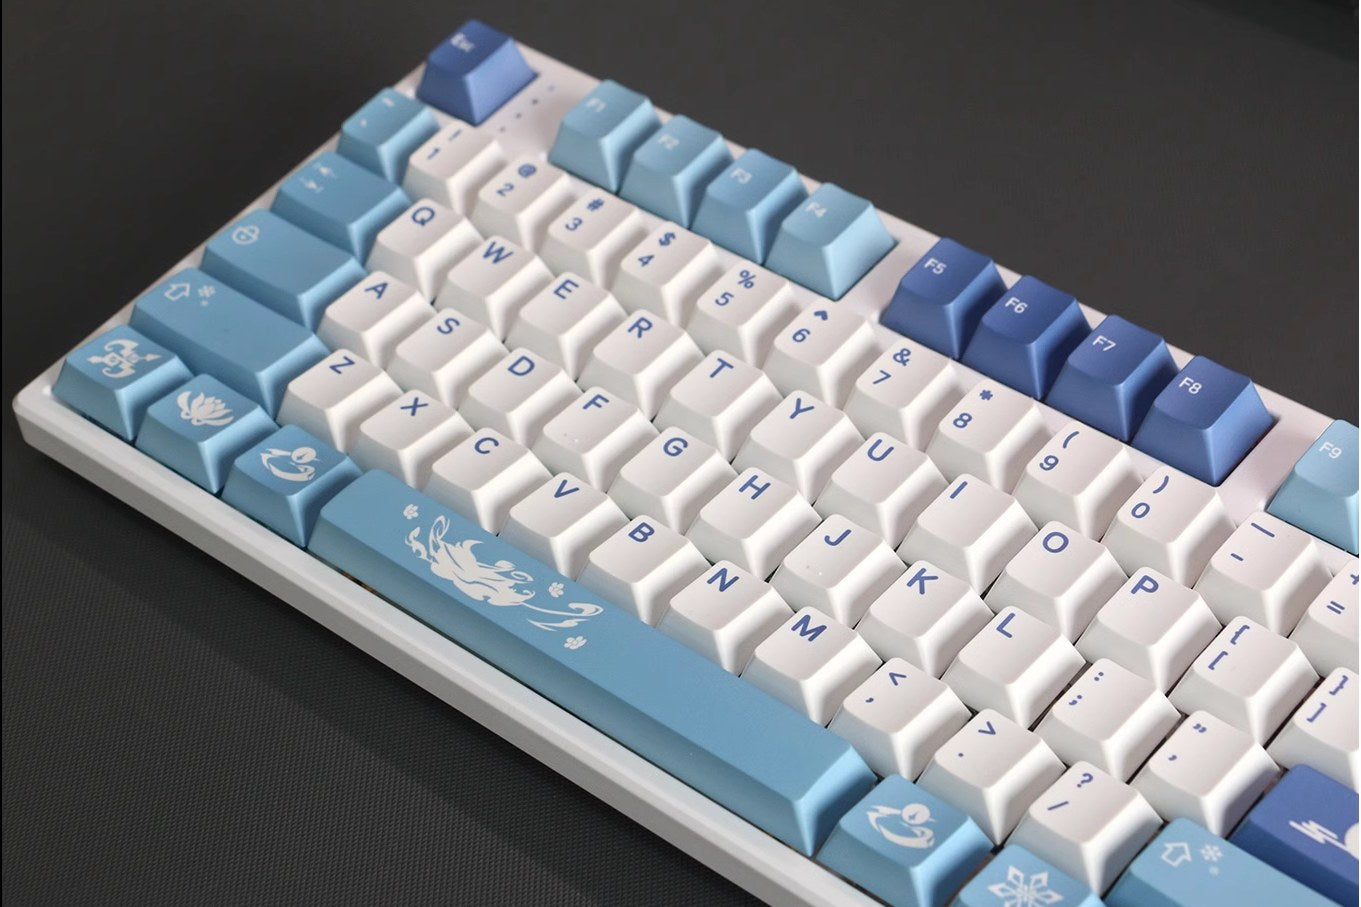 ❄️ Frozen Elegance: Crafted with precision and dedication, these keycaps showcase Ganyu's elegance and grace. The frosty theme mirrors her cryo abilities, creating an immersive experience for fans and gamers alike.